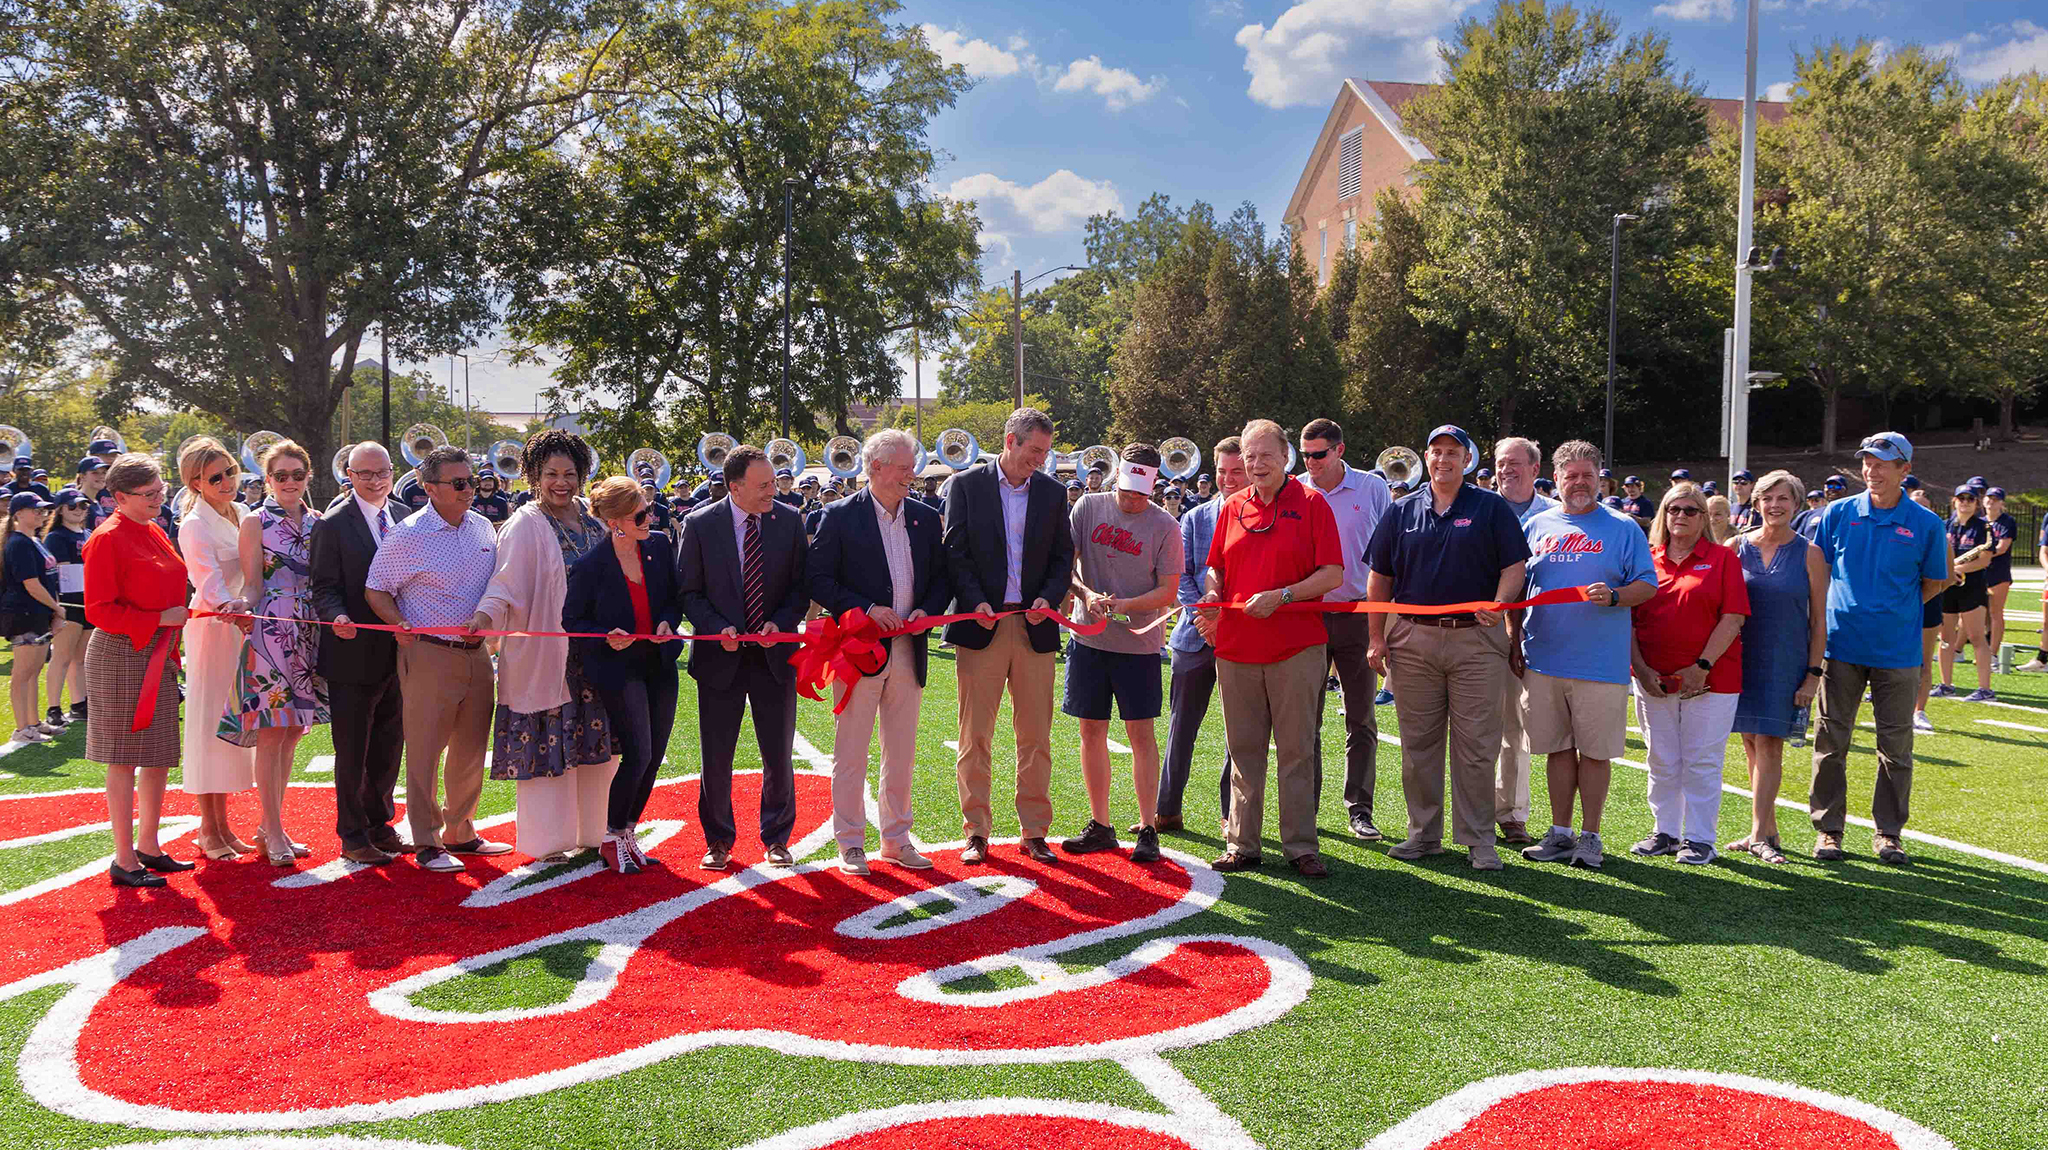 University leaders watch as Randy Dale (center), associate director of bands and director of athletic bands, center, cuts the ribbon on the new $5.4 million practice facility for the Pride of the South marching band. Photo by Amy Howell/University Development